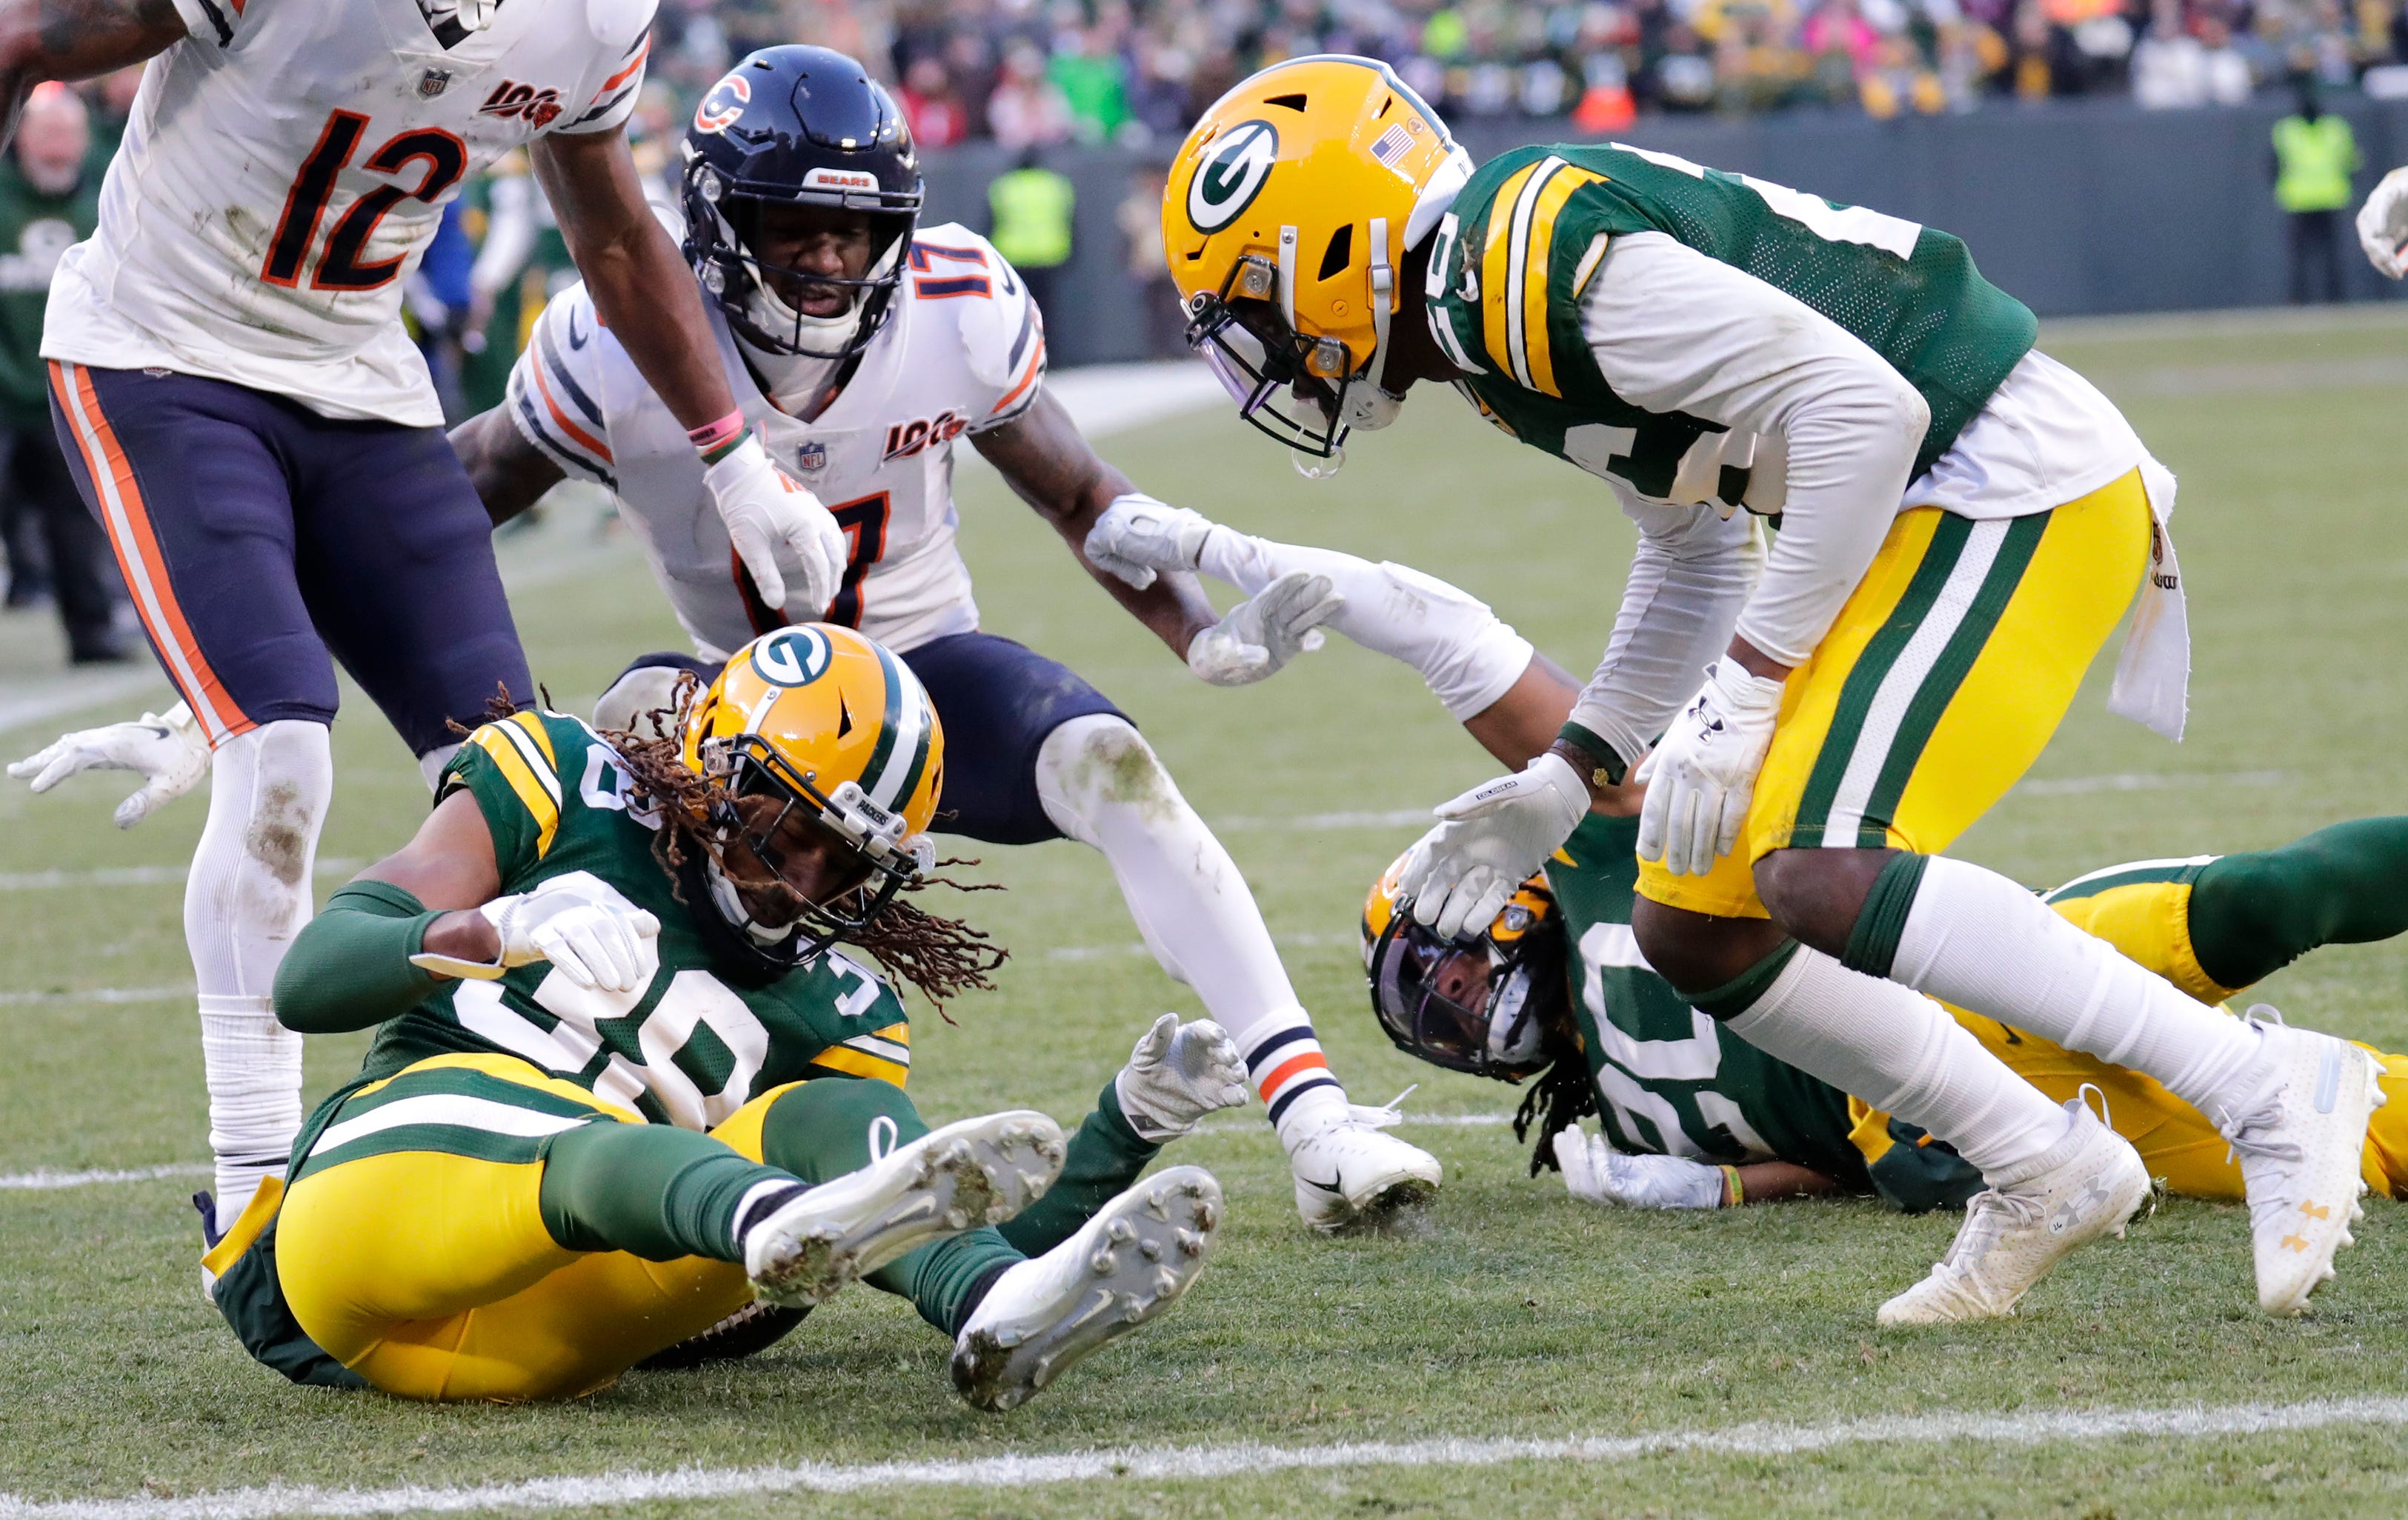 Green Bay Packers cornerback Tramon Williams (38) recovers the ball on the last play of the game to seal the victory against the Chicago Bears Sunday, December 15, 2019, at Lambeau Field in Green Bay, Wis.